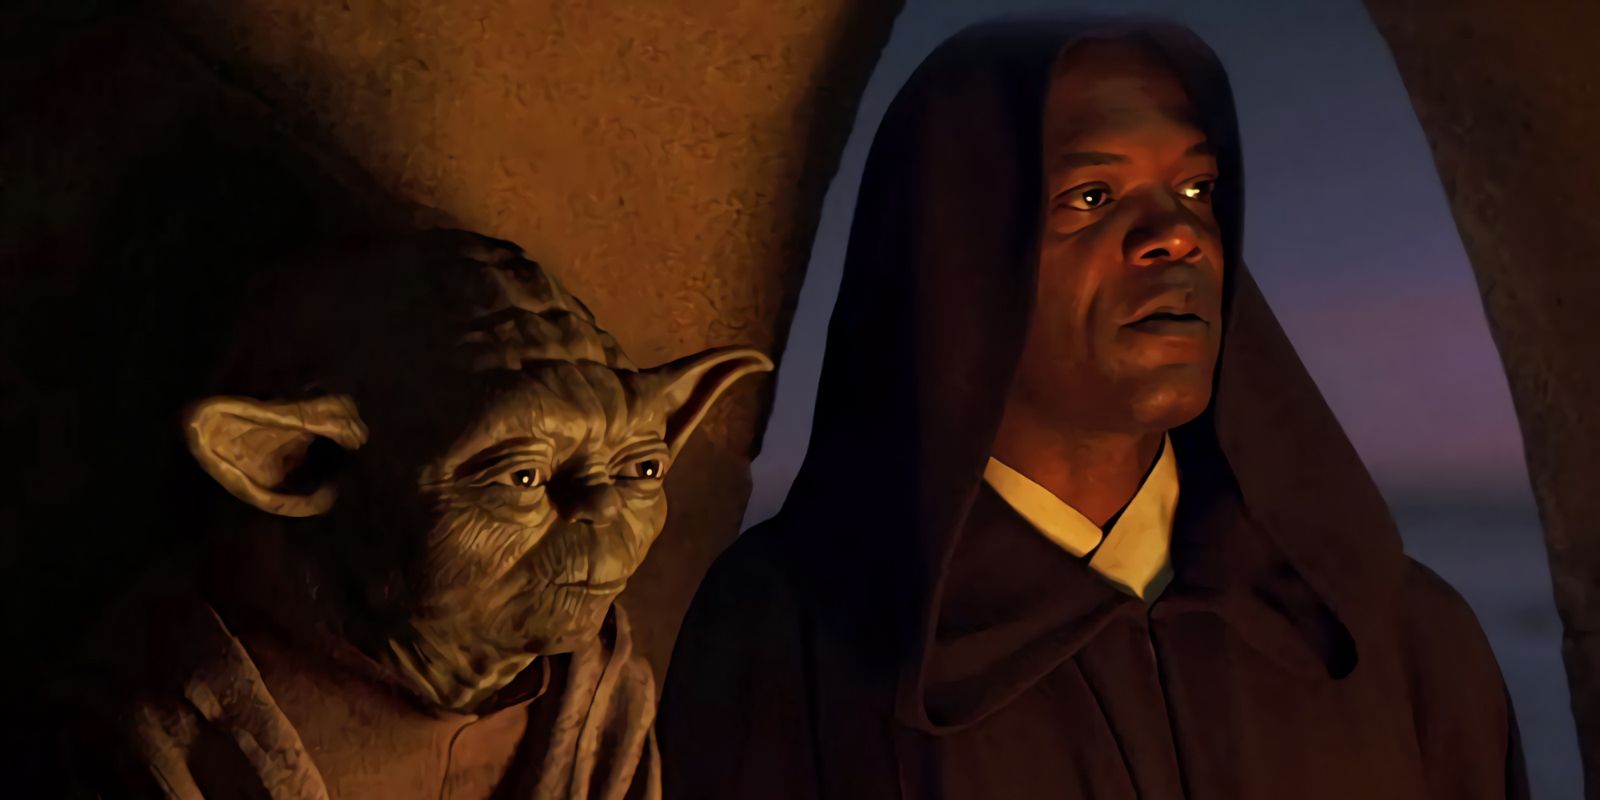 Yoda and Mace Windu stand side-by-side looking serious in Star Wars The Phantom Menace.